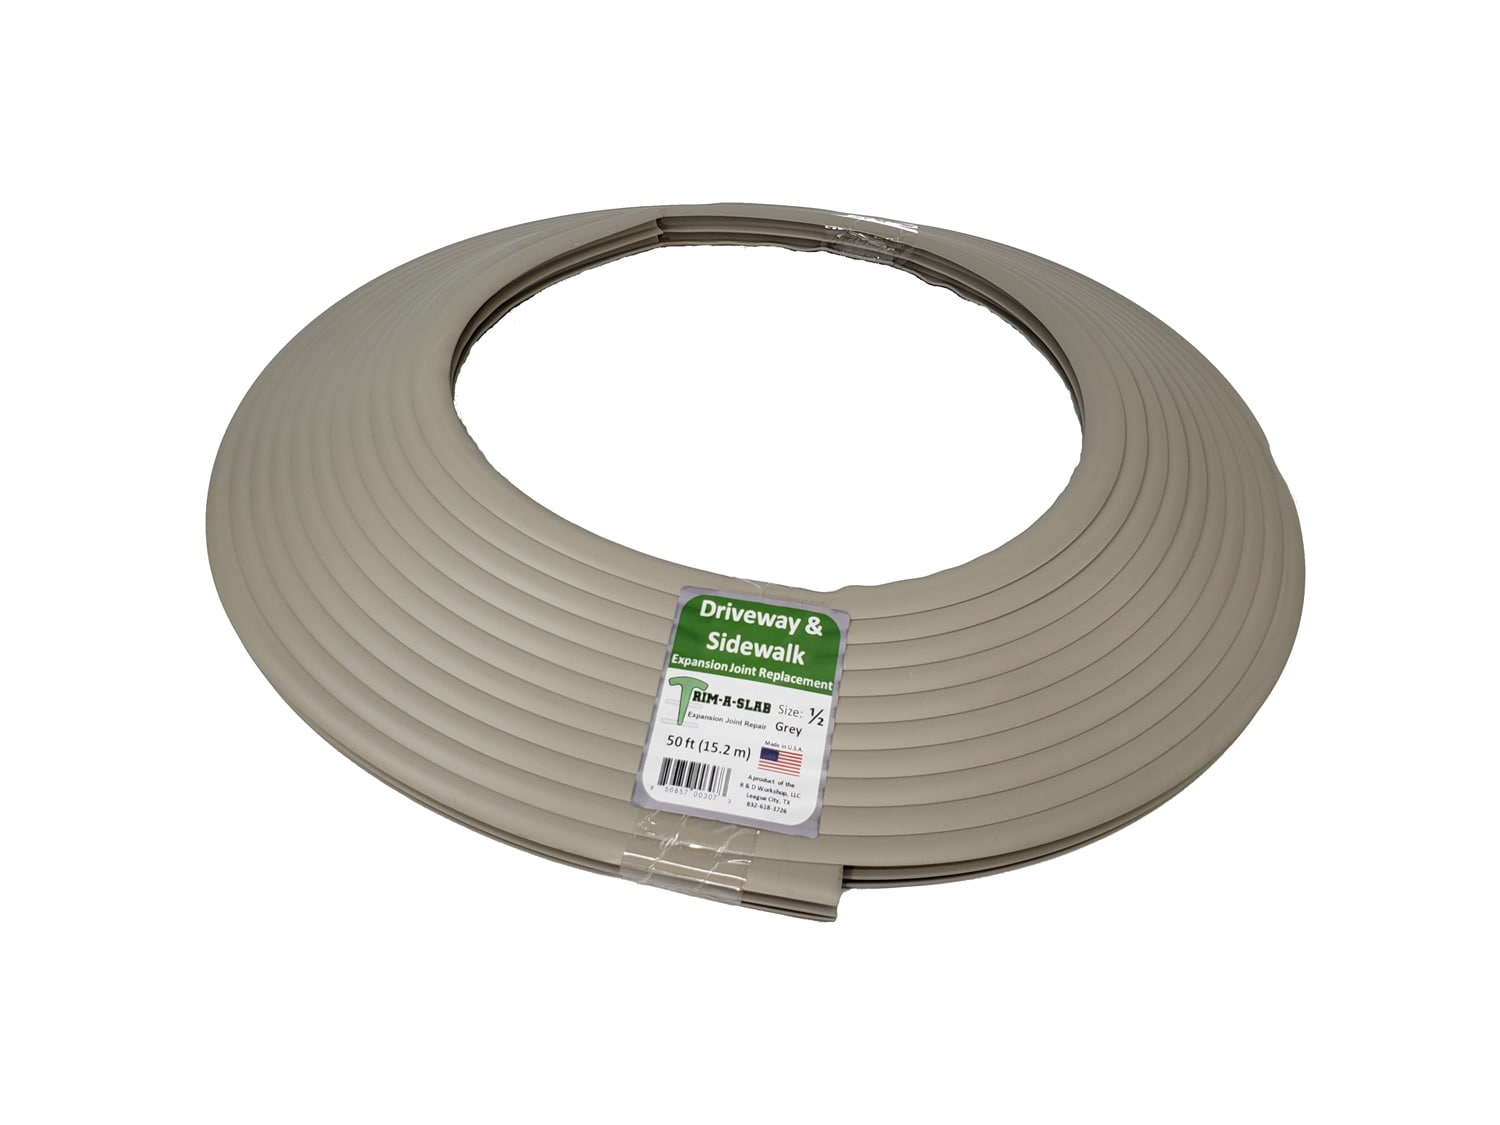 Trim-A-Slab 3/8 in. x 25 ft. Concrete Expansion Joint in Black